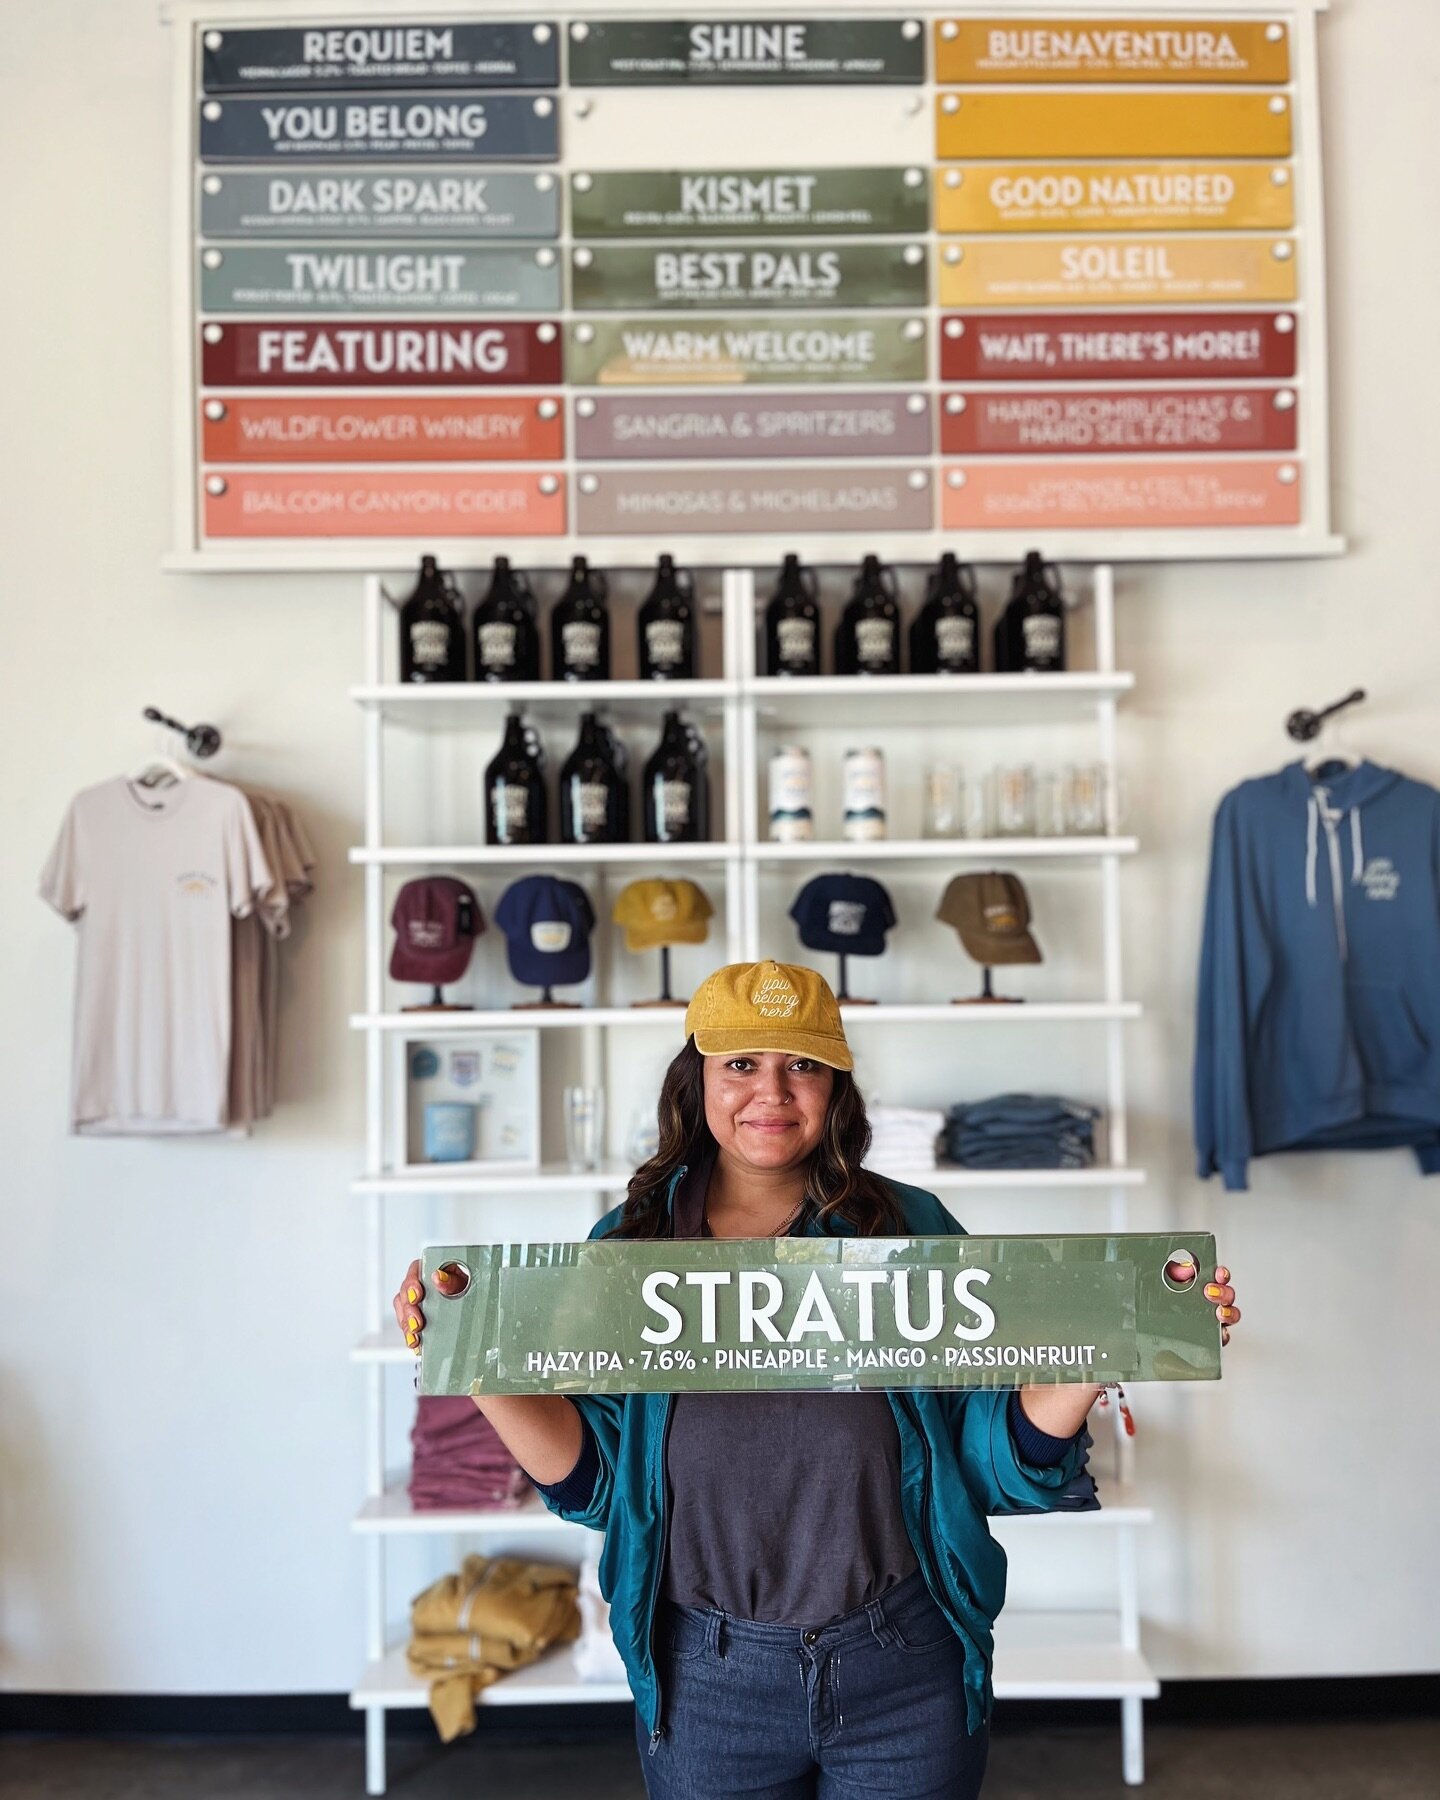 🚨Stratus is back on tap!

Hazy, cloudy days for our Hazy IPA ☁️🍻

Get out of the rain this weekend and join us at Bright Spark for a pint of our fresh batch!

☁️ STRATUS ☁️
Hazy IPA
7.6% abv 
With Notes Of Pineapple, Mango, and Passionfruit